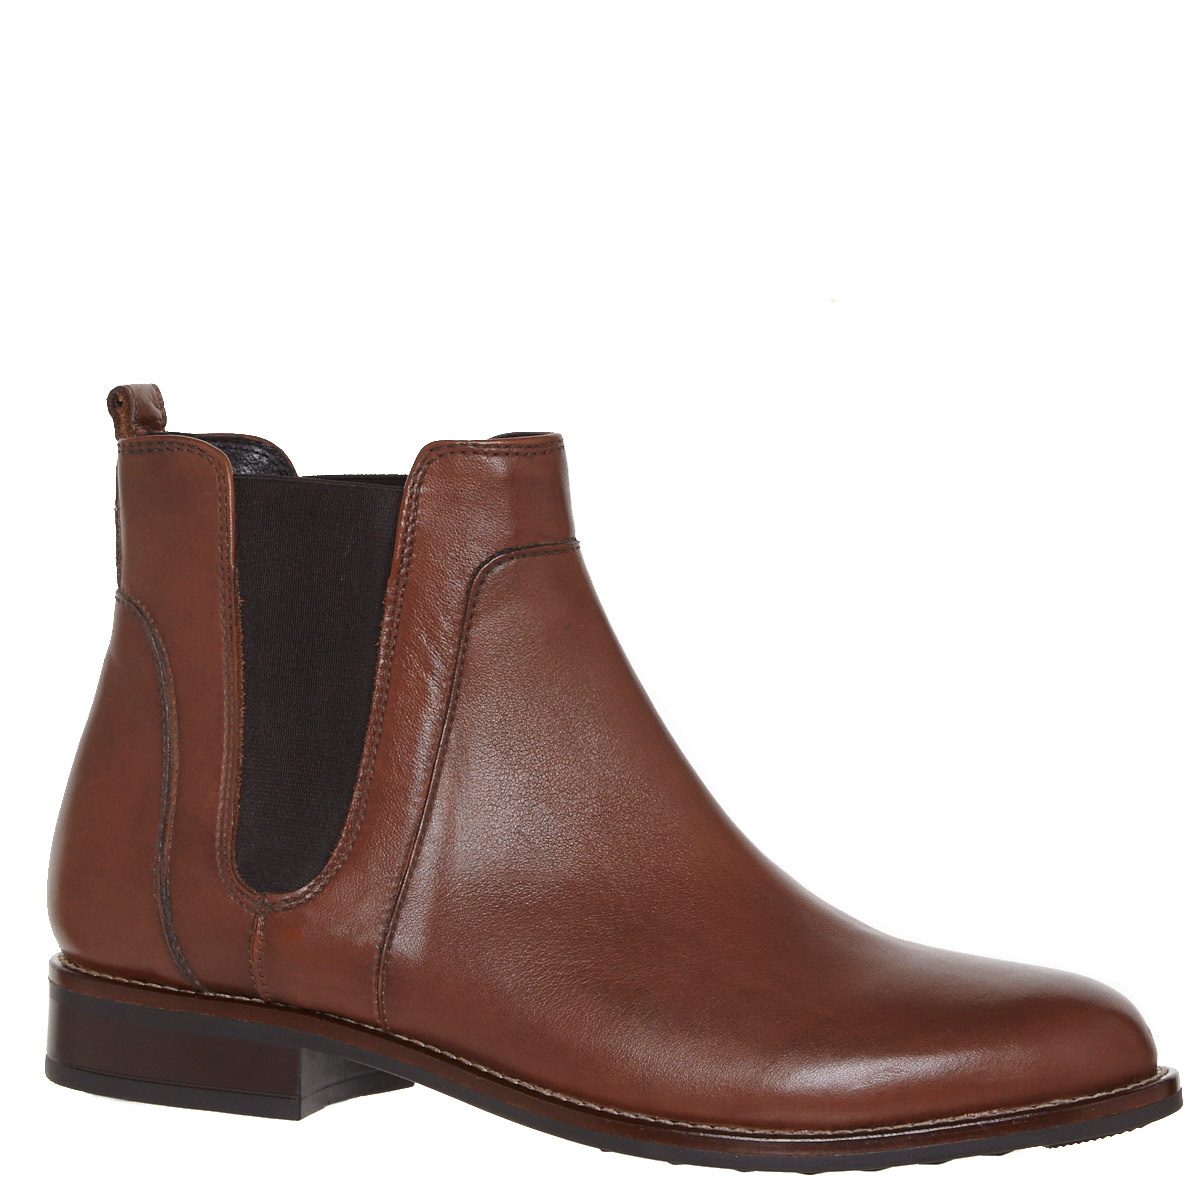 Tan Leather Chelsea Ankle Boots